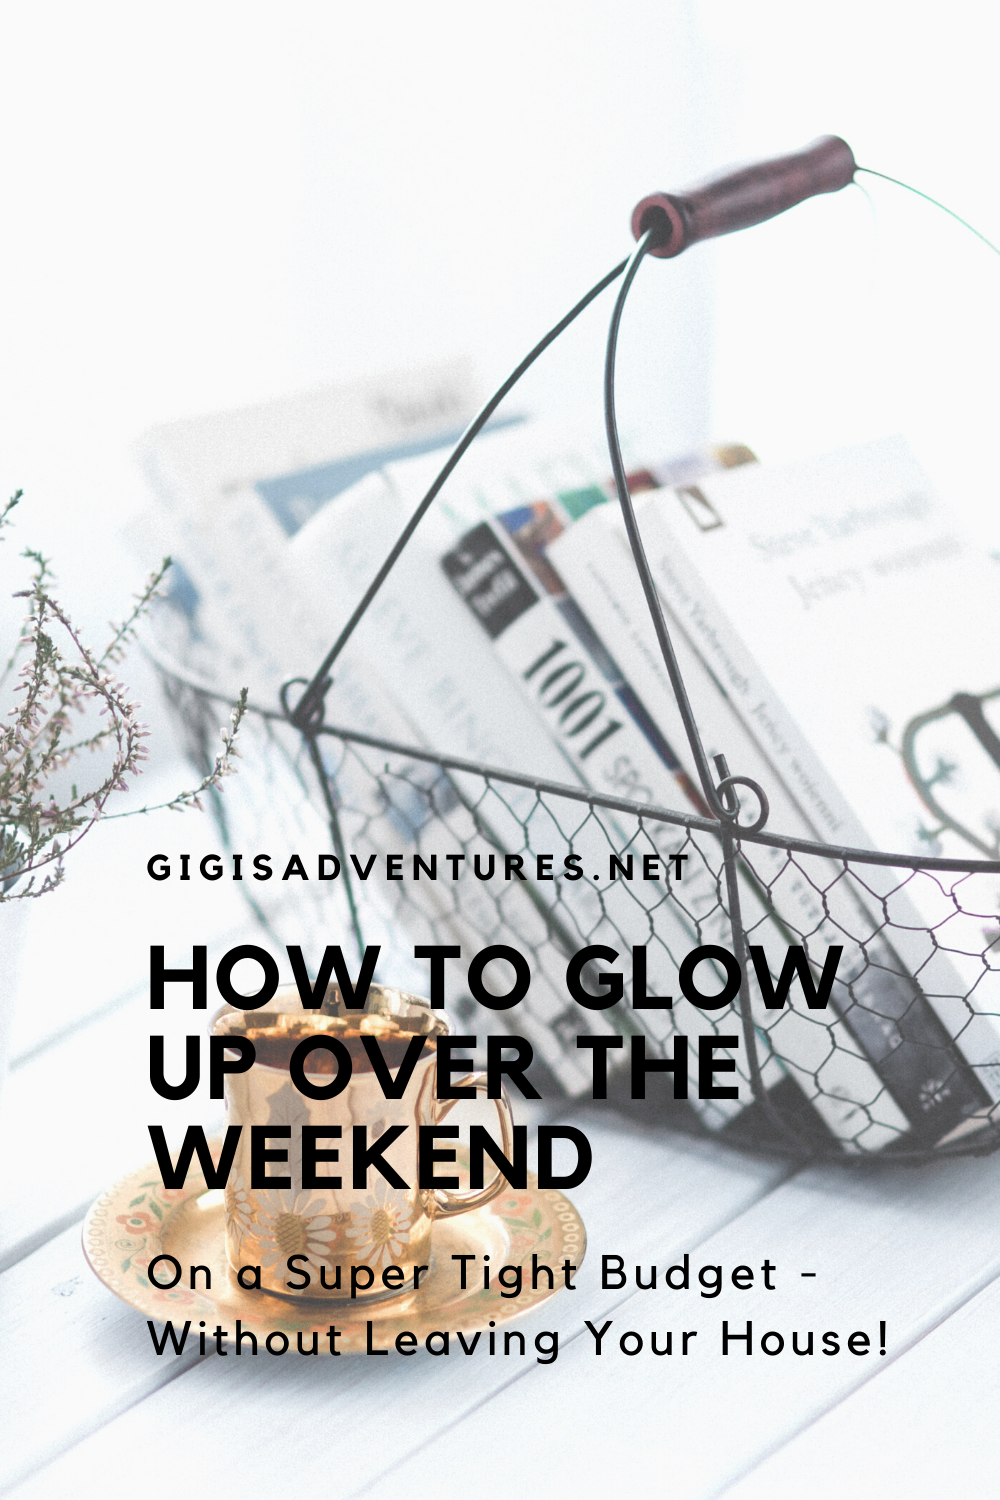 How To Glow Up Over The Weekend - On A Super Tight Budget and Without Leaving Your House!